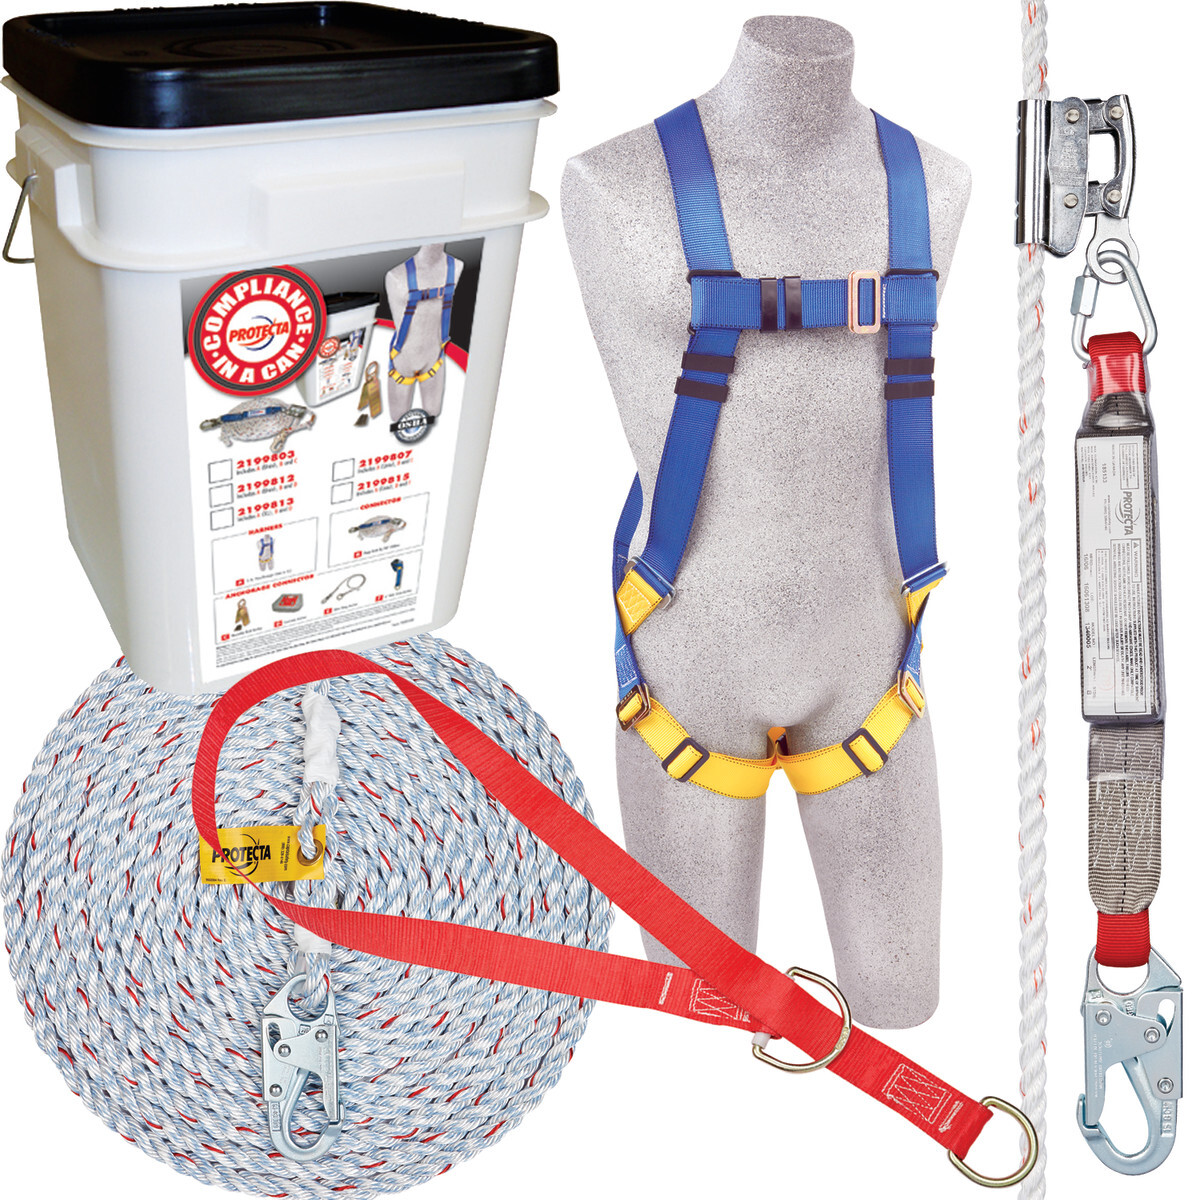 3M™ PROTECTA® Fall Protection Compliance Kit 2199815 (Includes Tie-Off Adaptor, Harness, Rope Adjuster With Lanyard, Lifeline An